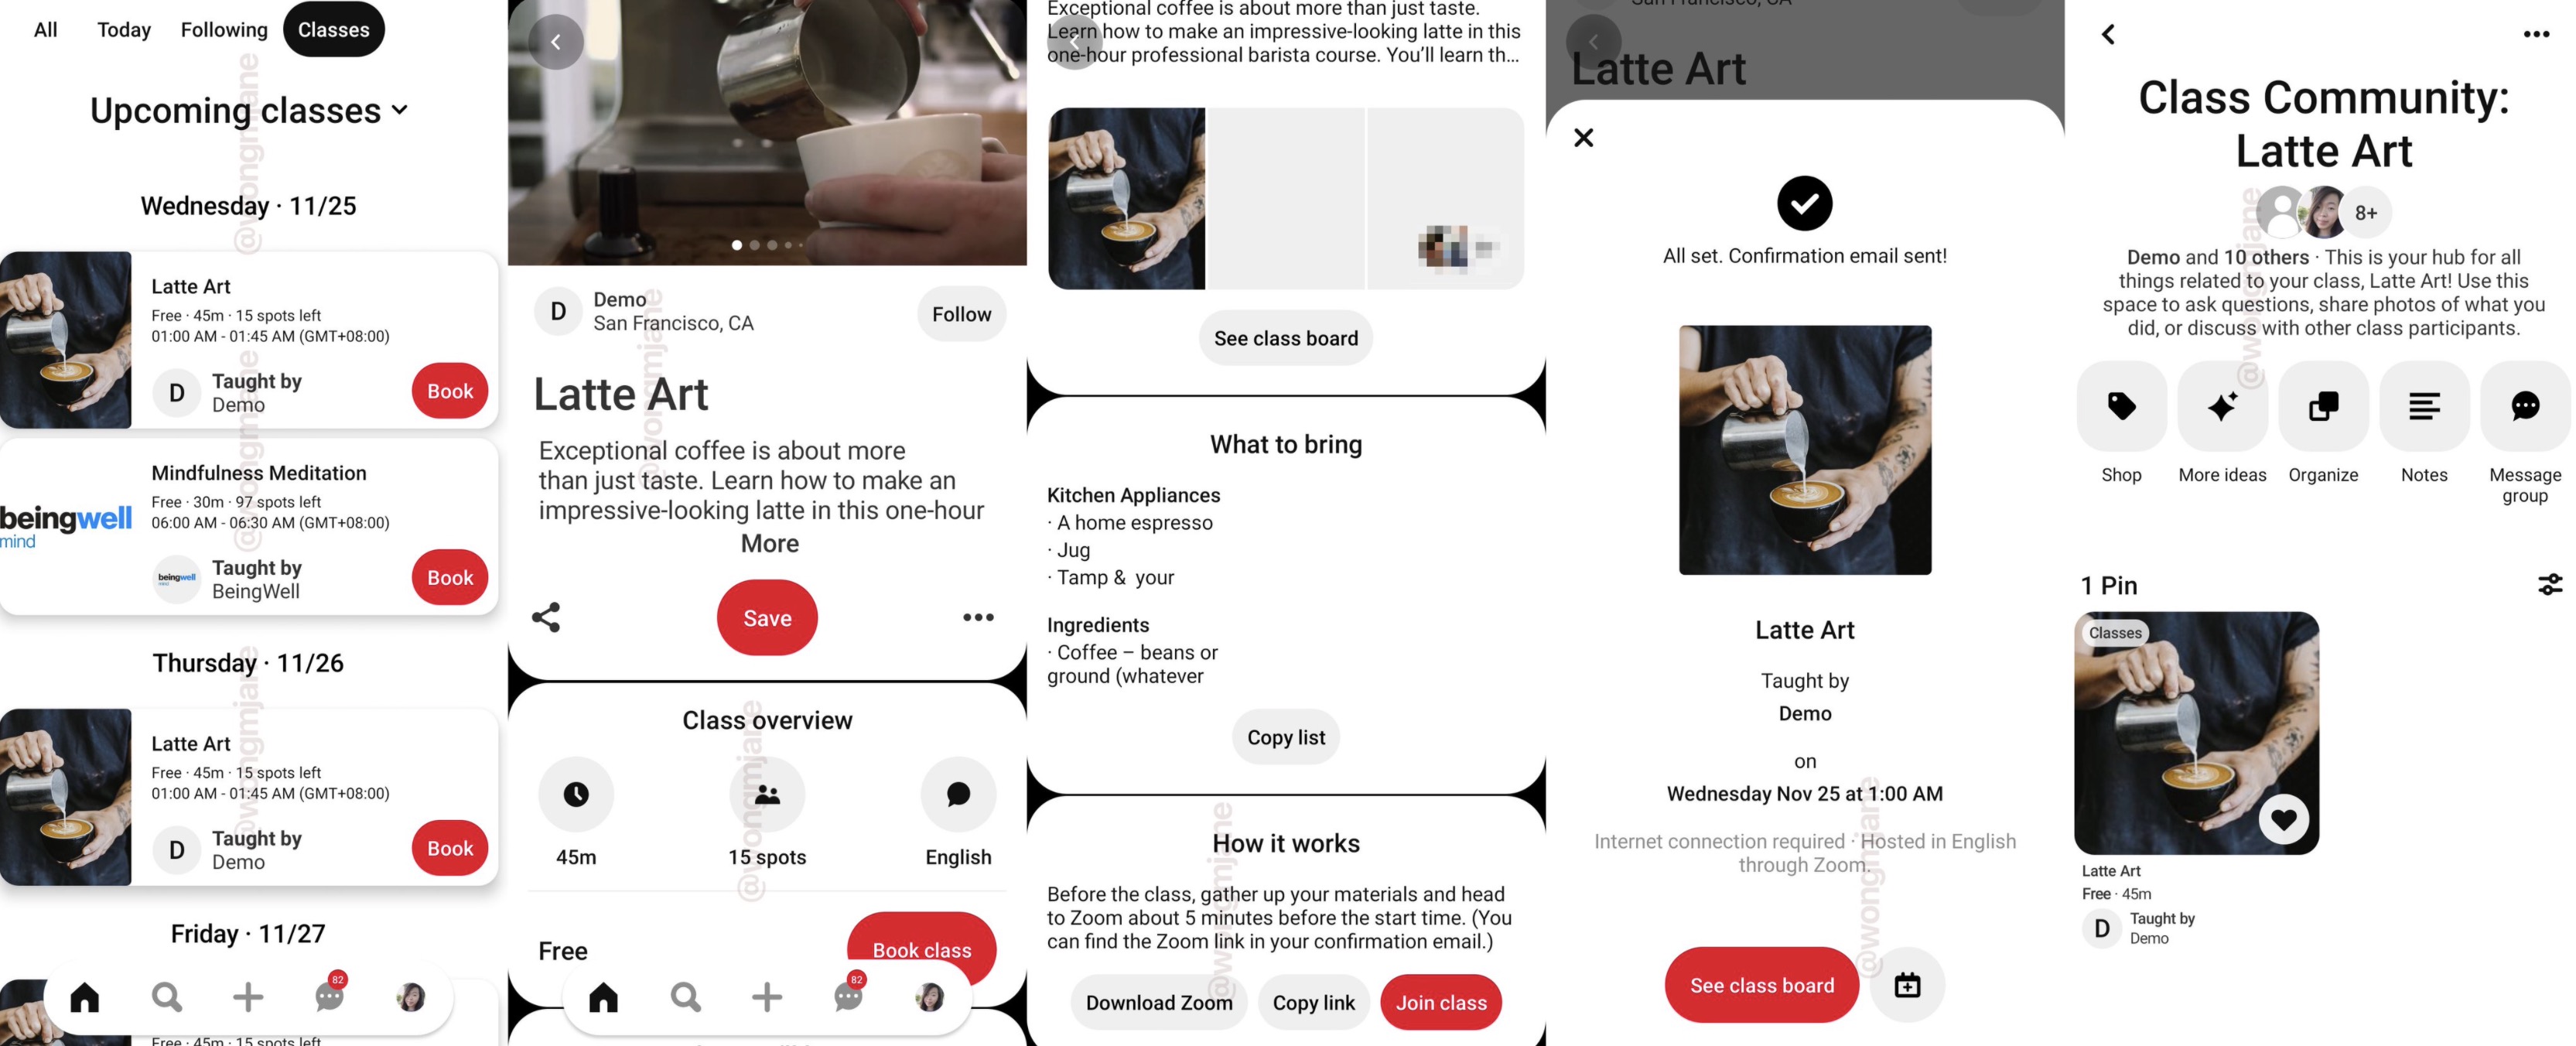 Pinterest tests online events with dedicated ‘class communities’